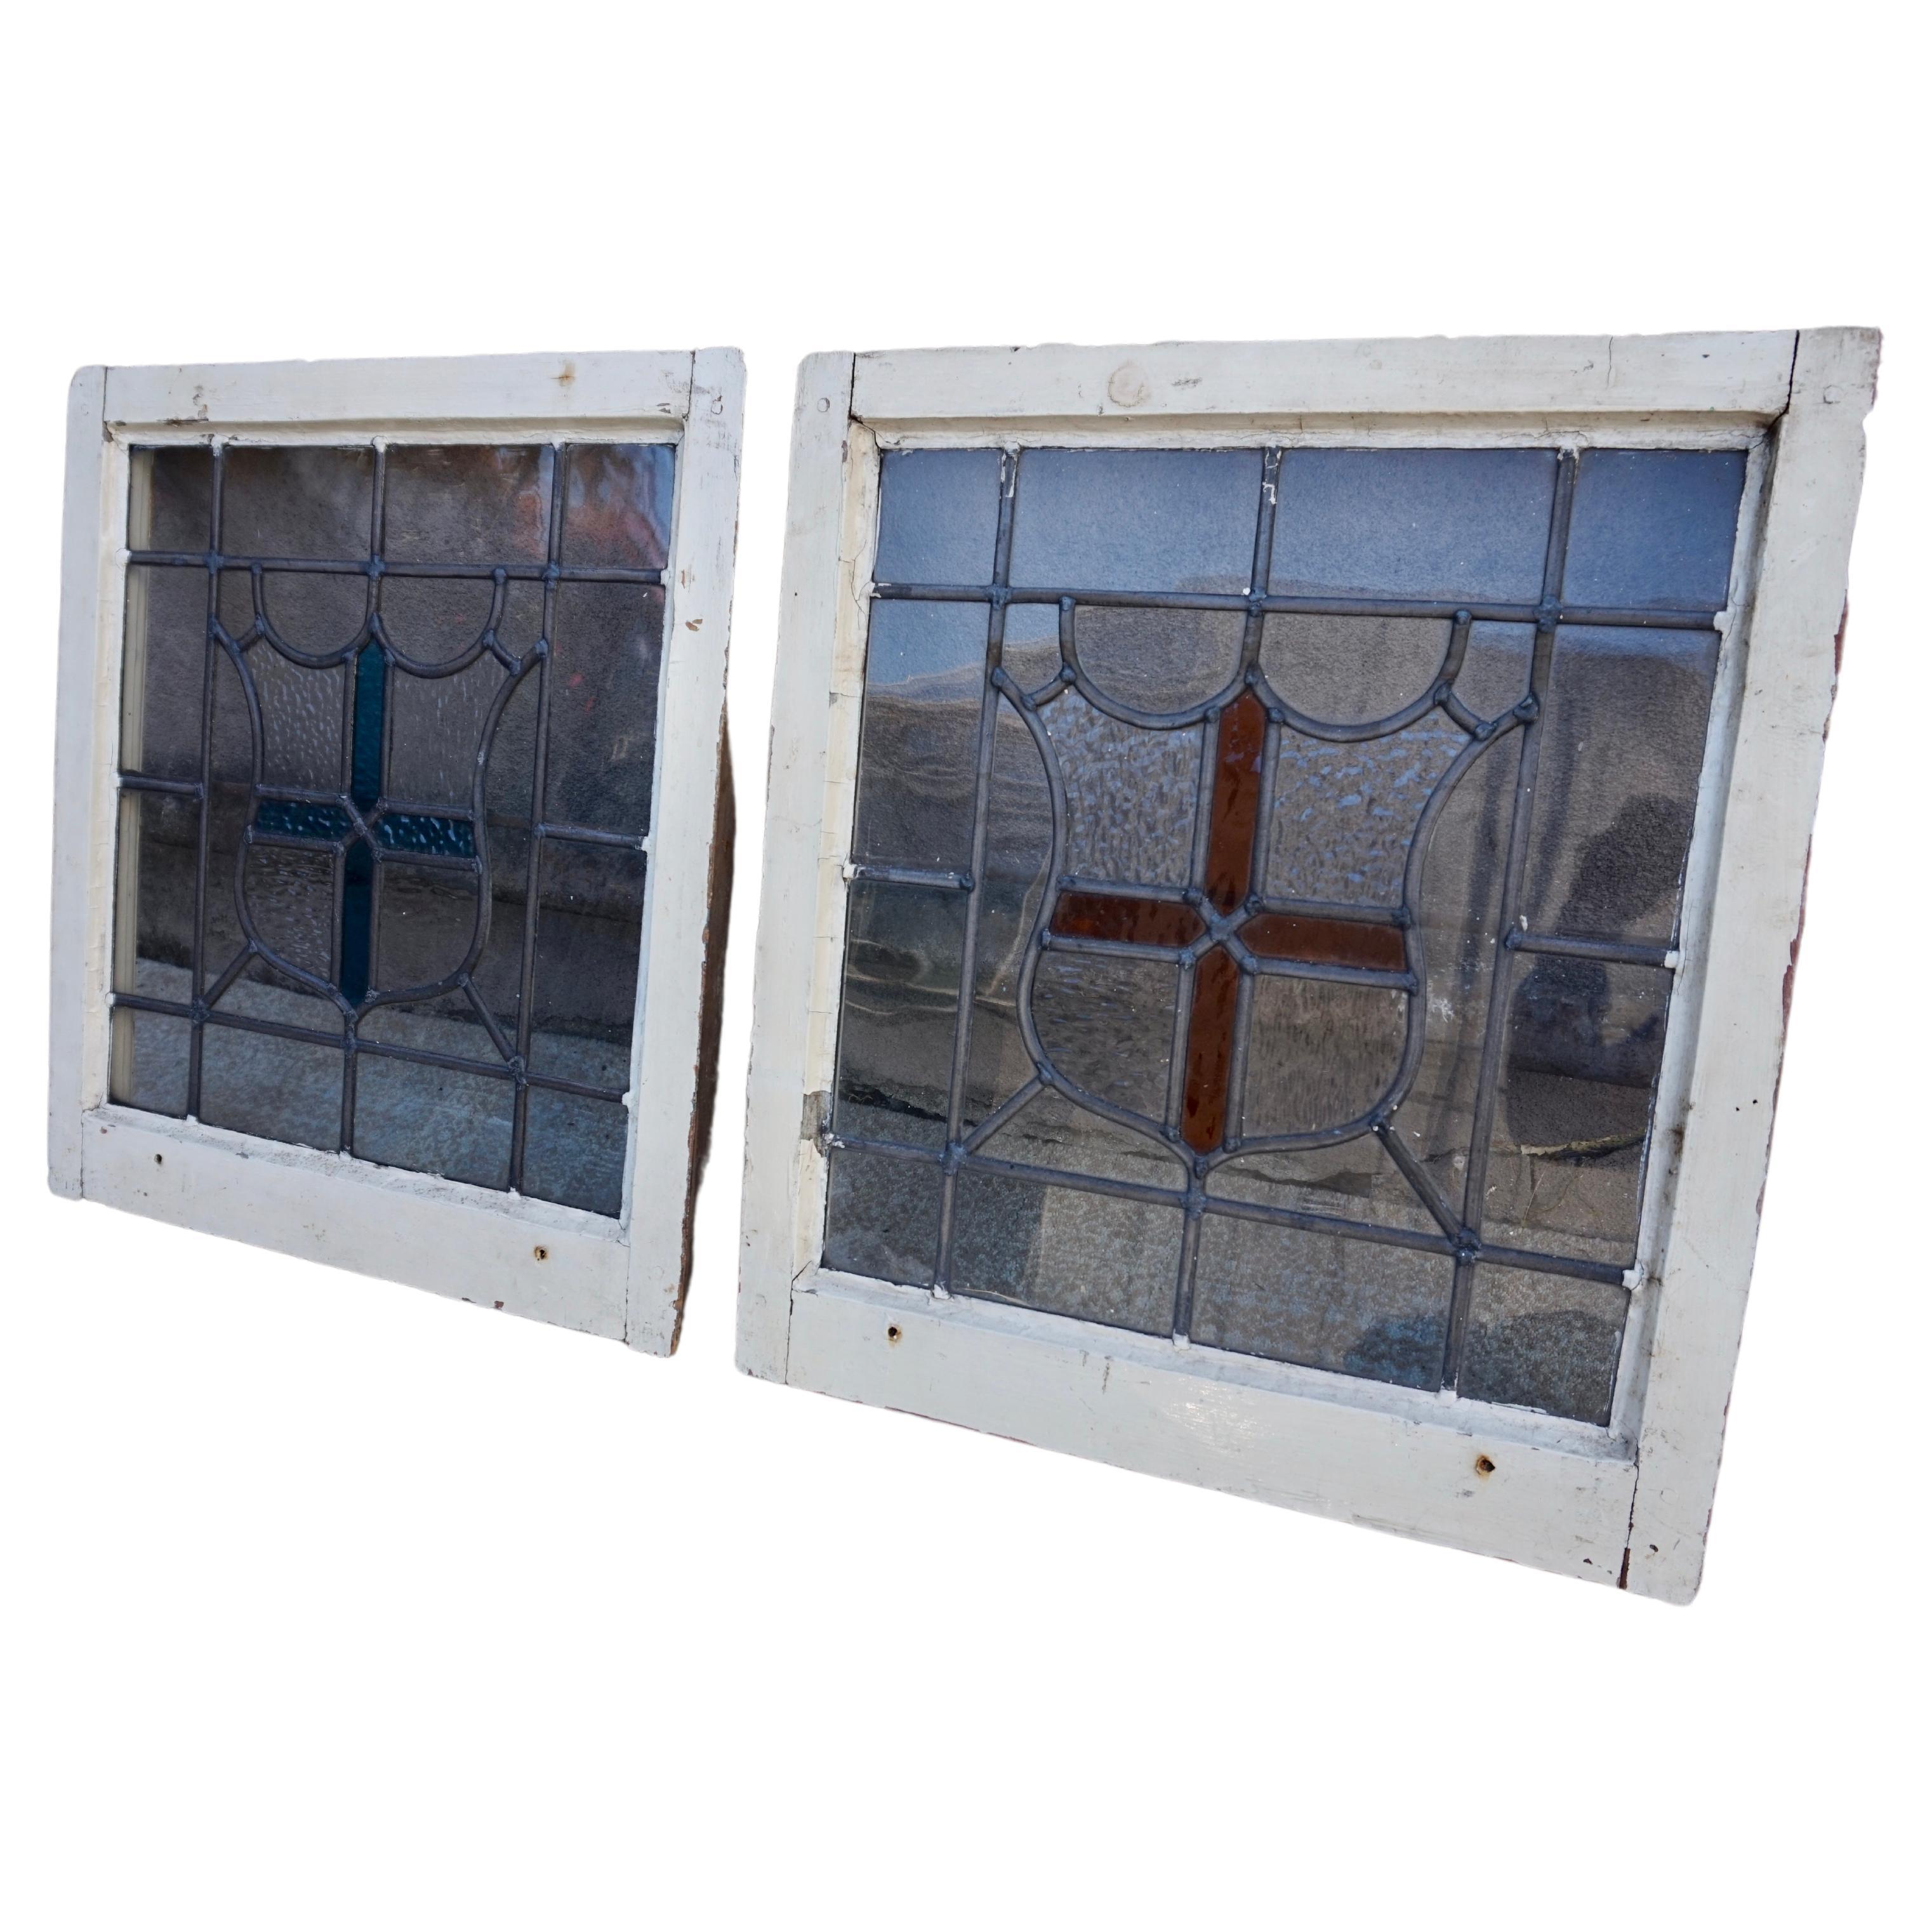 Pair of English Arts & Crafts Stain Glass Windows with Crest Shields